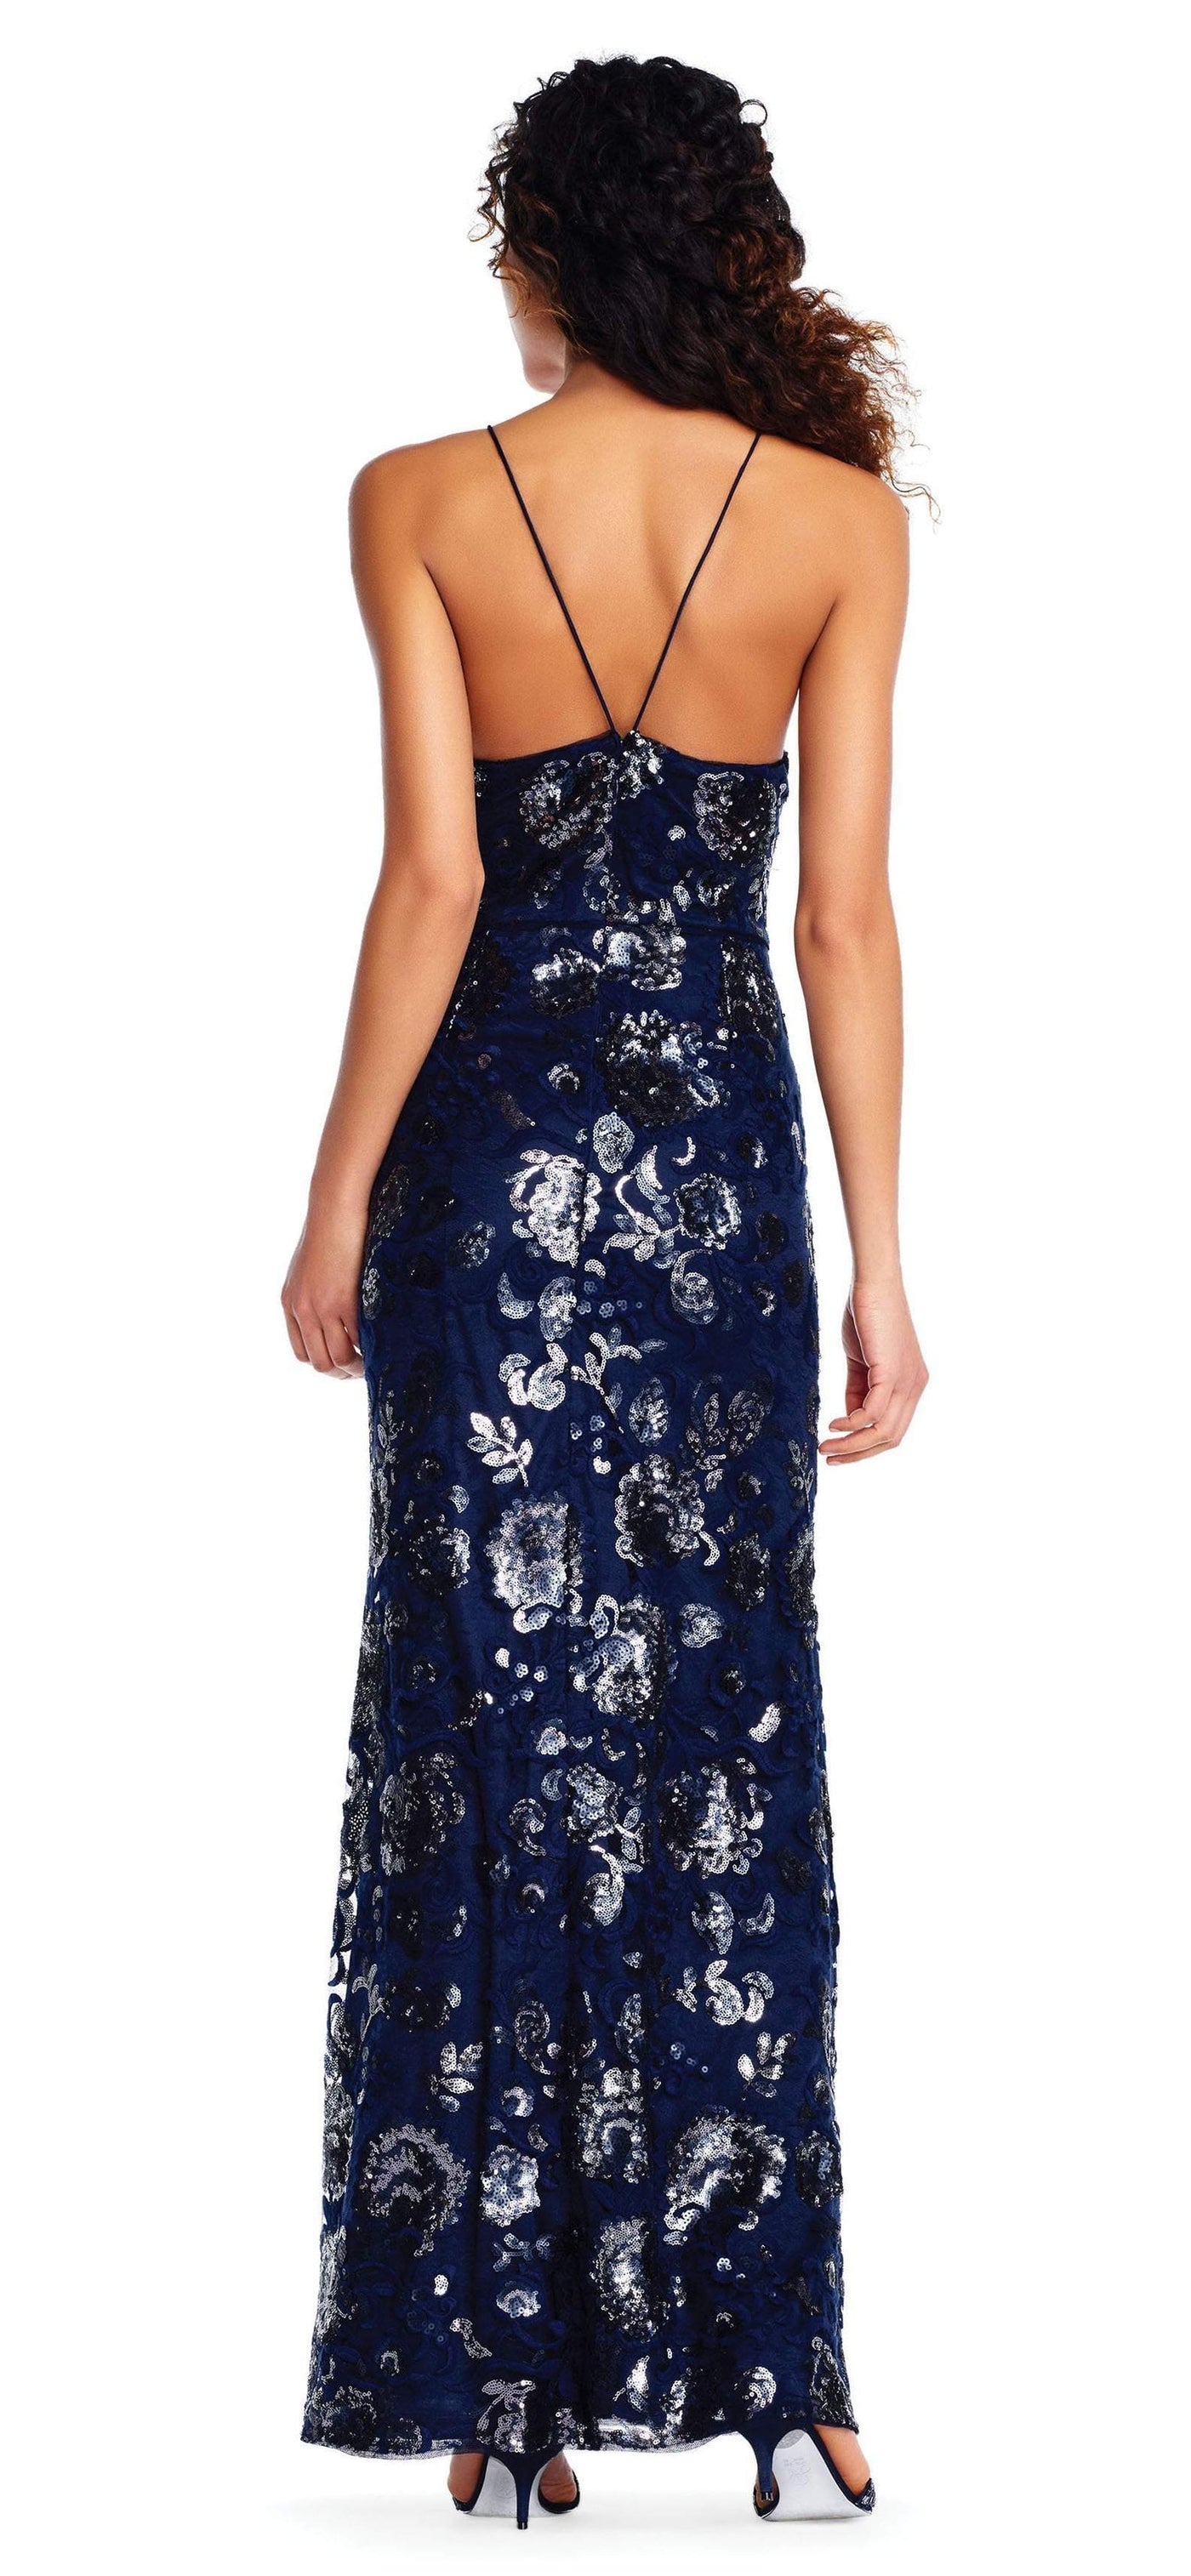 Adrianna Papell - AP1E202991 Floral Sequined Halter Sheath Dress In Blue